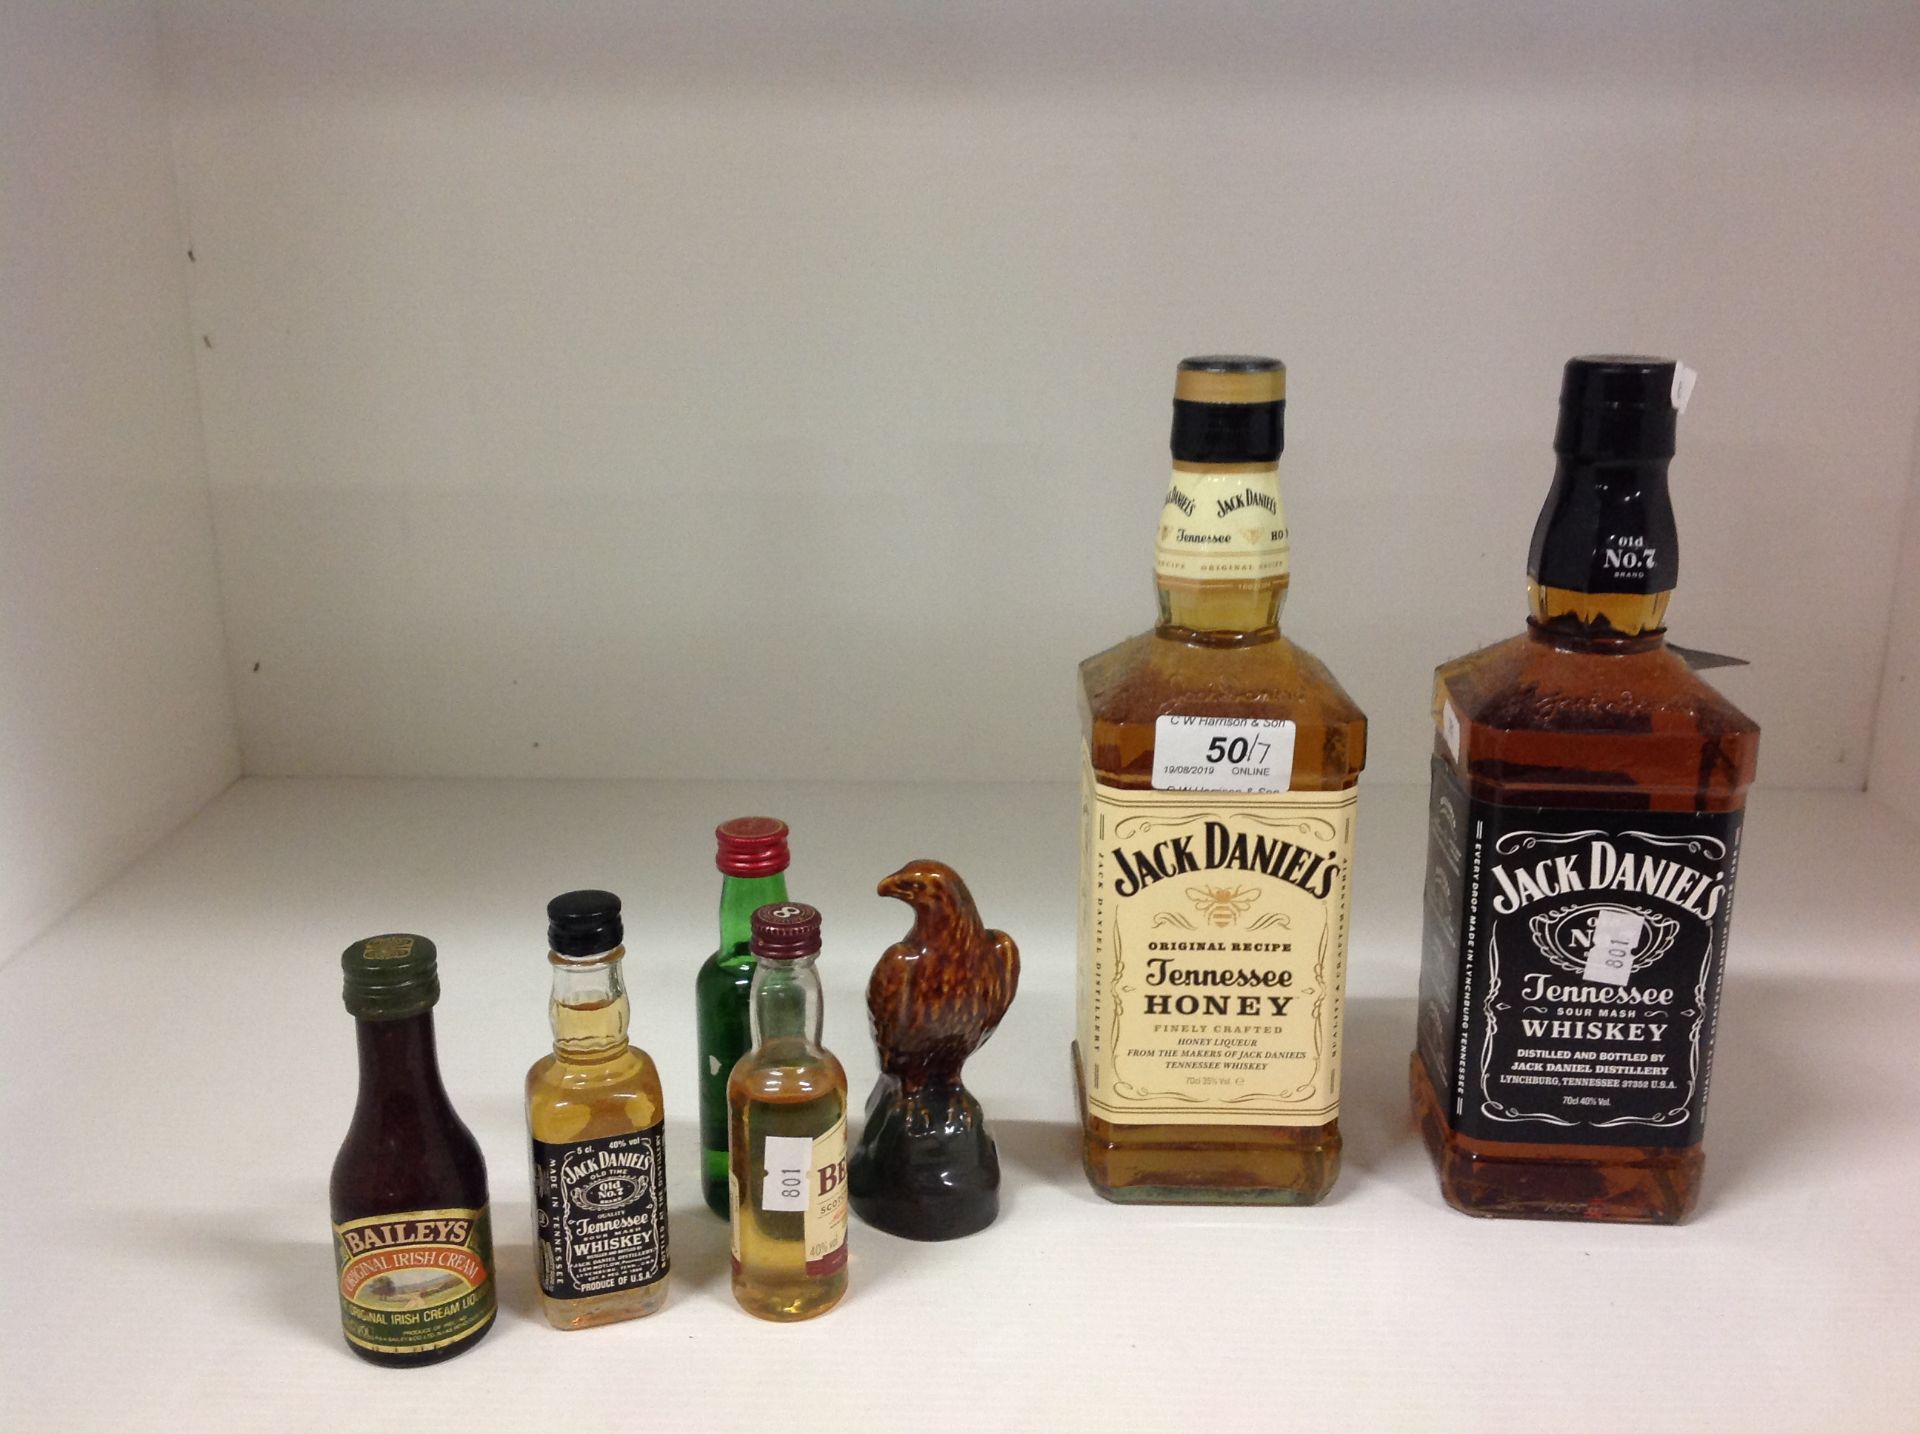 A 70cl bottle of Jack Daniels Tennessee Sour Mash Whiskey,